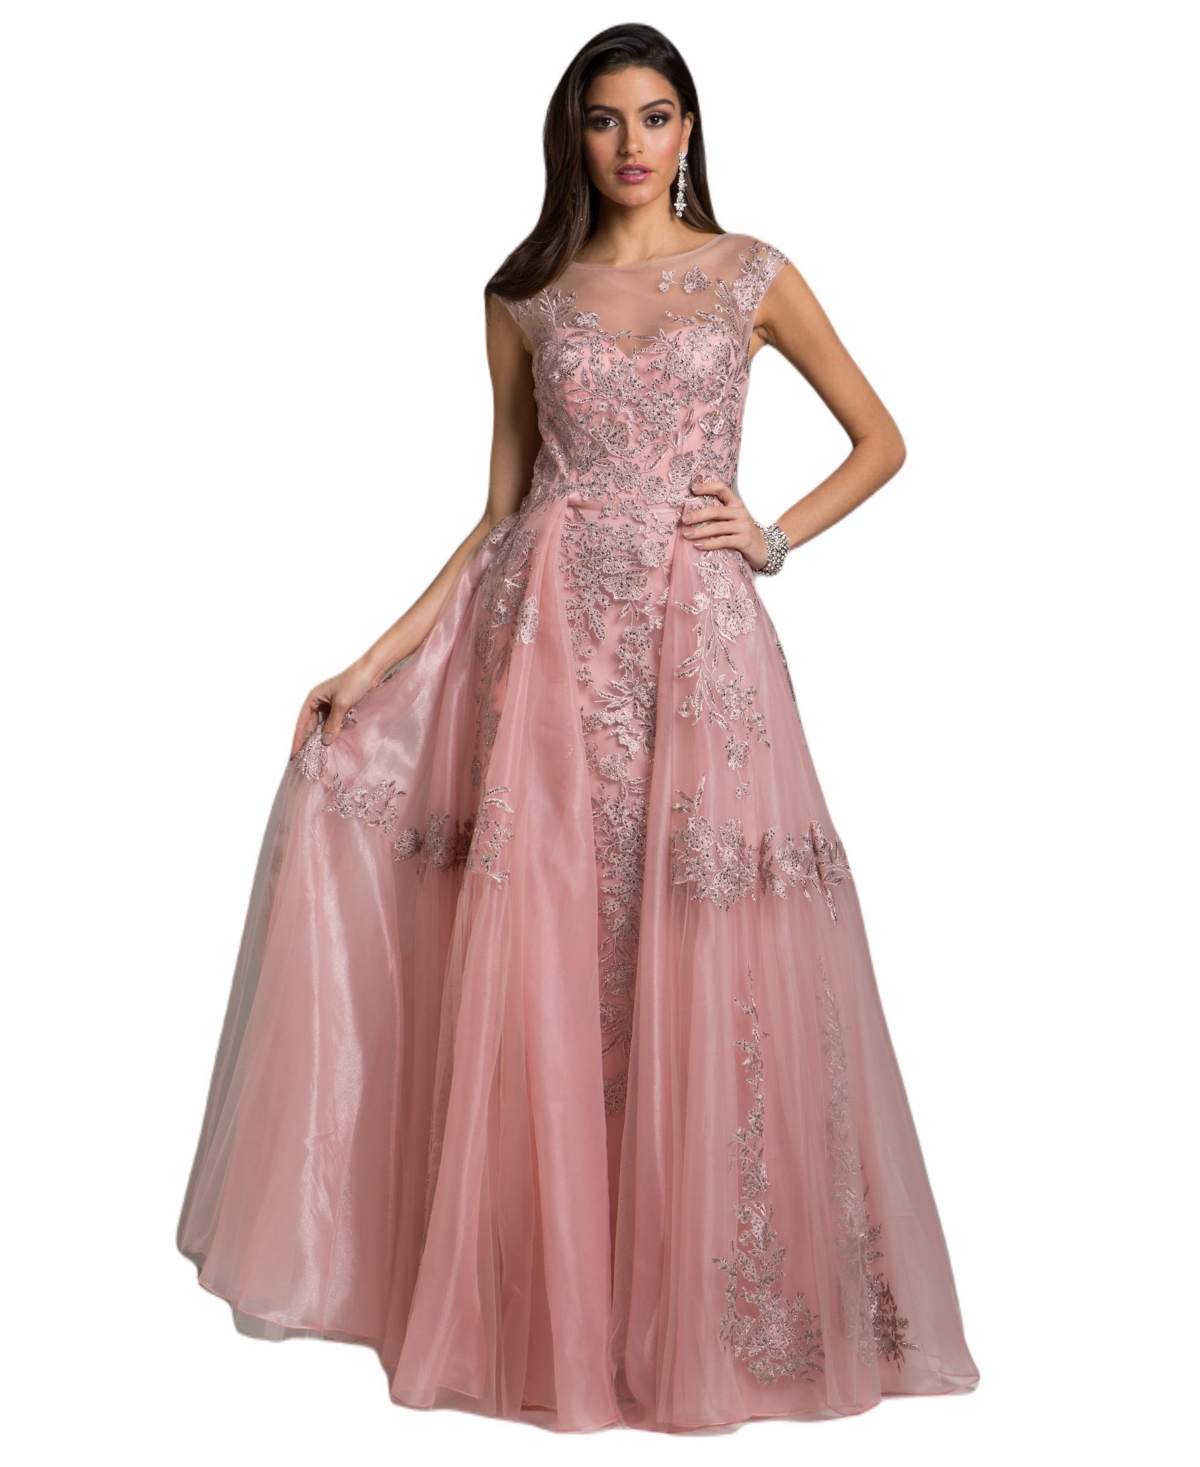 Women's Organza Ball gown With Overskirt - Mauve